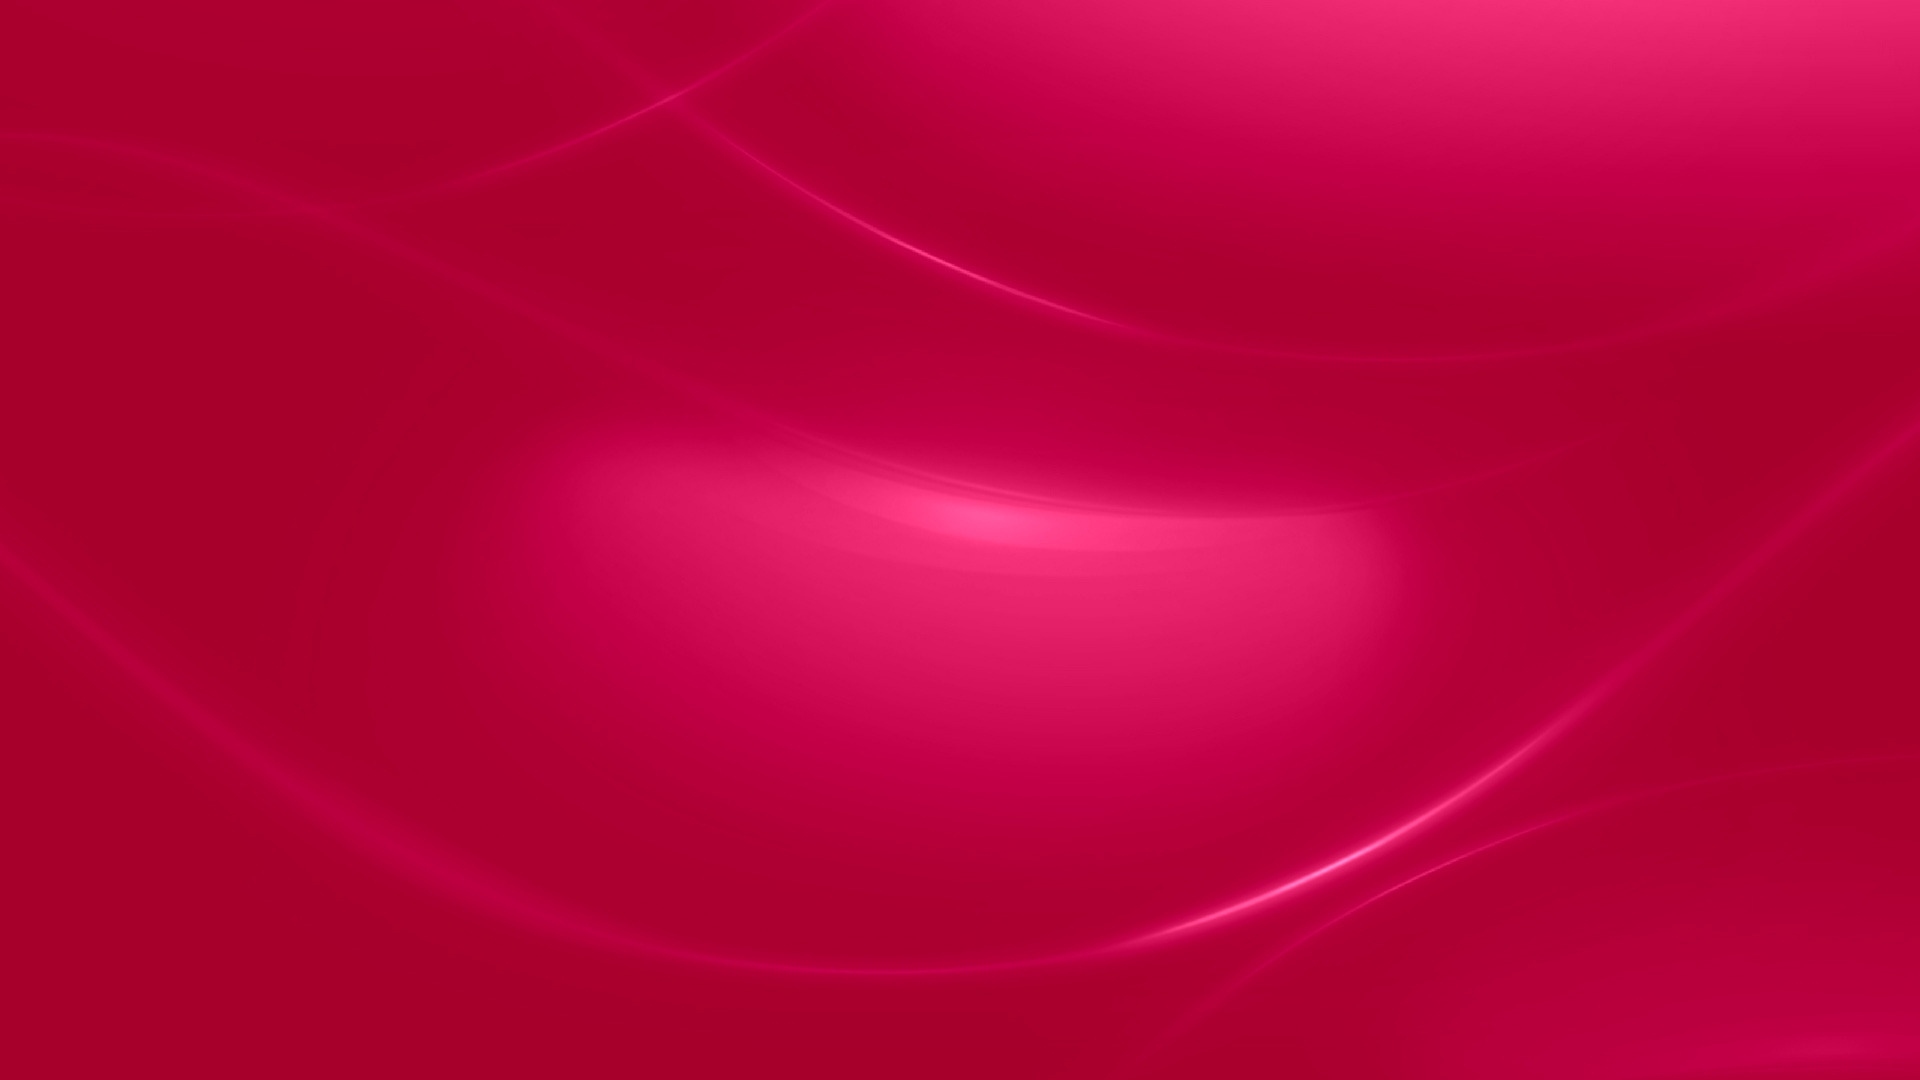 Minimal Pink Waves for 1920 x 1080 HDTV 1080p resolution